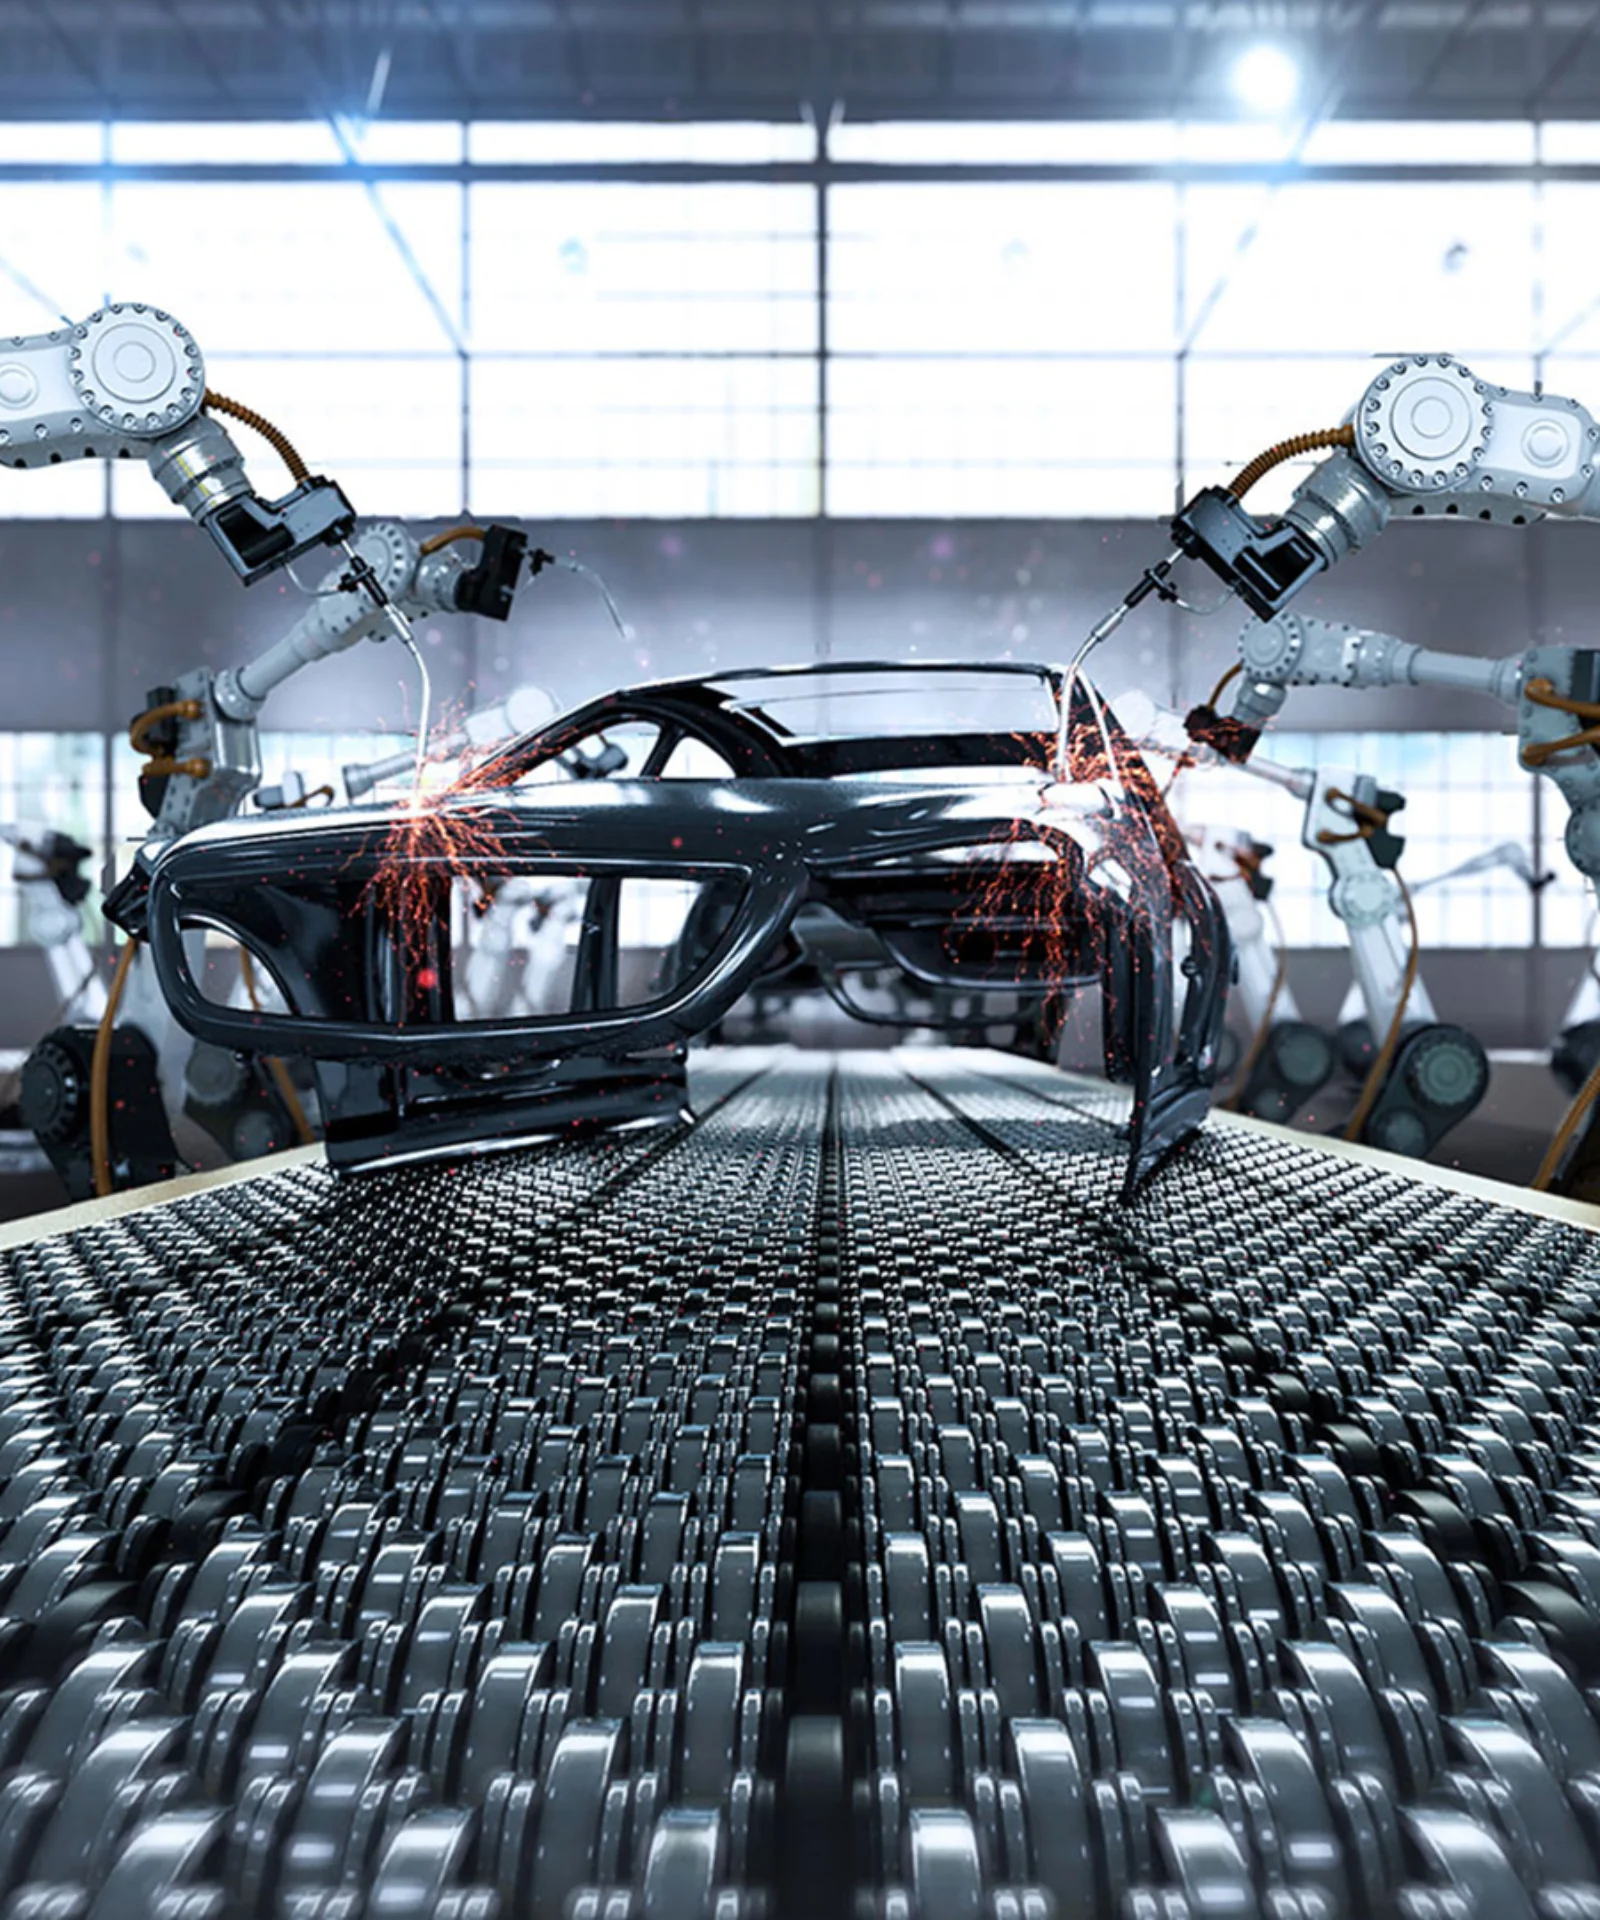 This image showcases a high-tech manufacturing environment where robotic arms are welding a car chassis on an automated production line. The factory setting is bright and spacious, with large windows allowing natural light to flood in. The robotic arms, equipped with welding tools, are precisely and efficiently assembling the car body, highlighting the advanced technology and automation in the automotive manufacturing industry. This visual emphasizes the cutting-edge processes and innovation driving the sector.